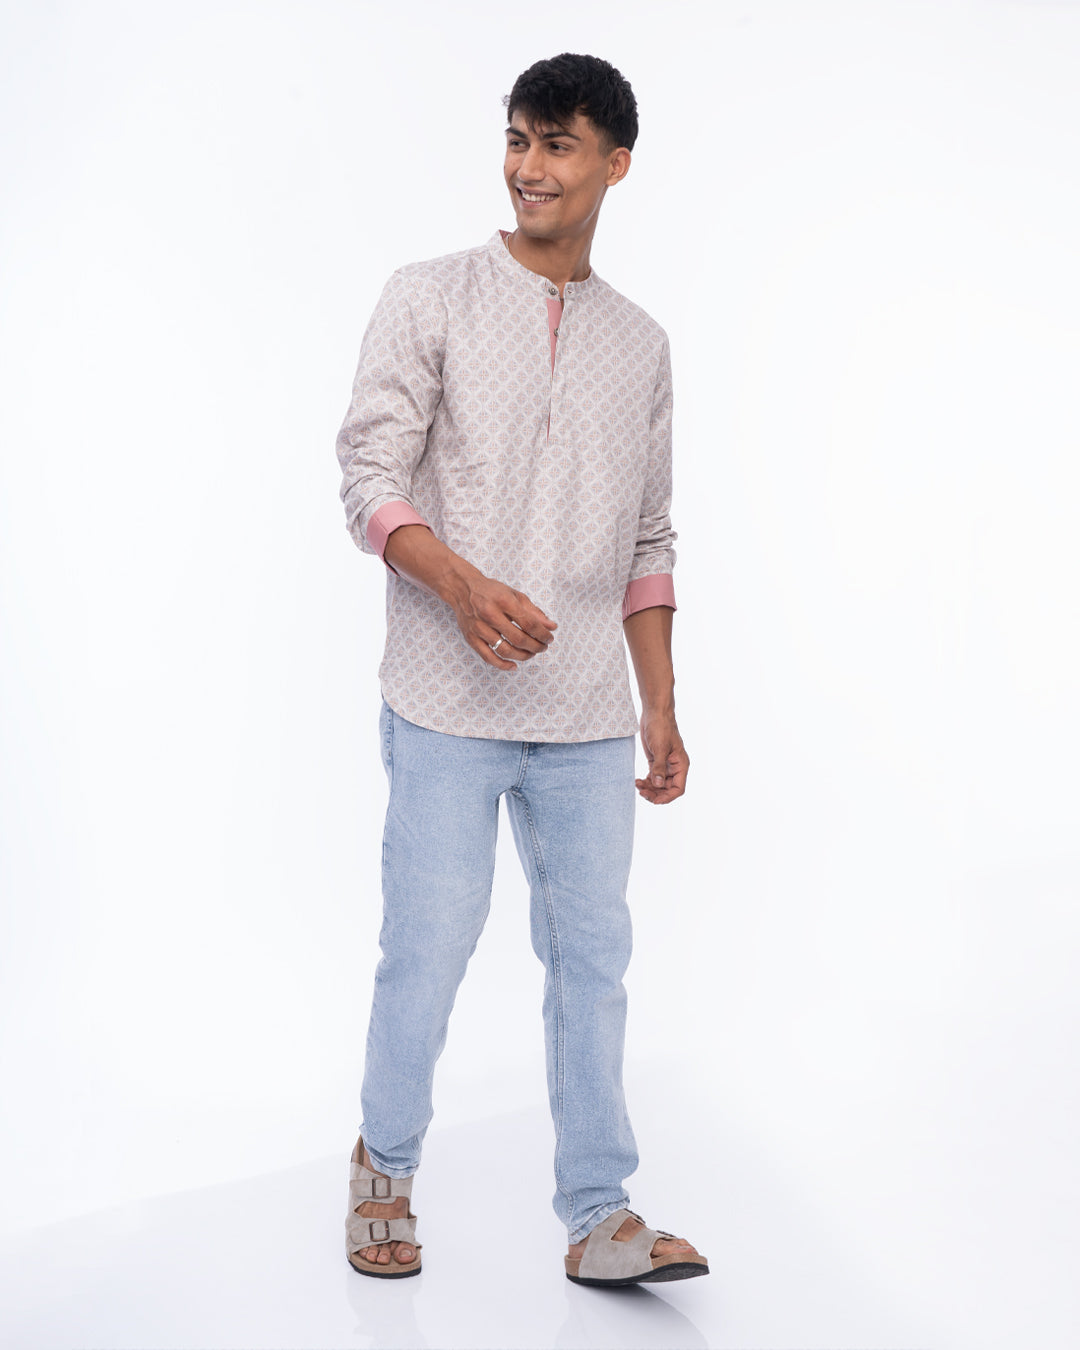 Comfortable traditional mild blue short kurta for men, ideal for casual and festive wear.